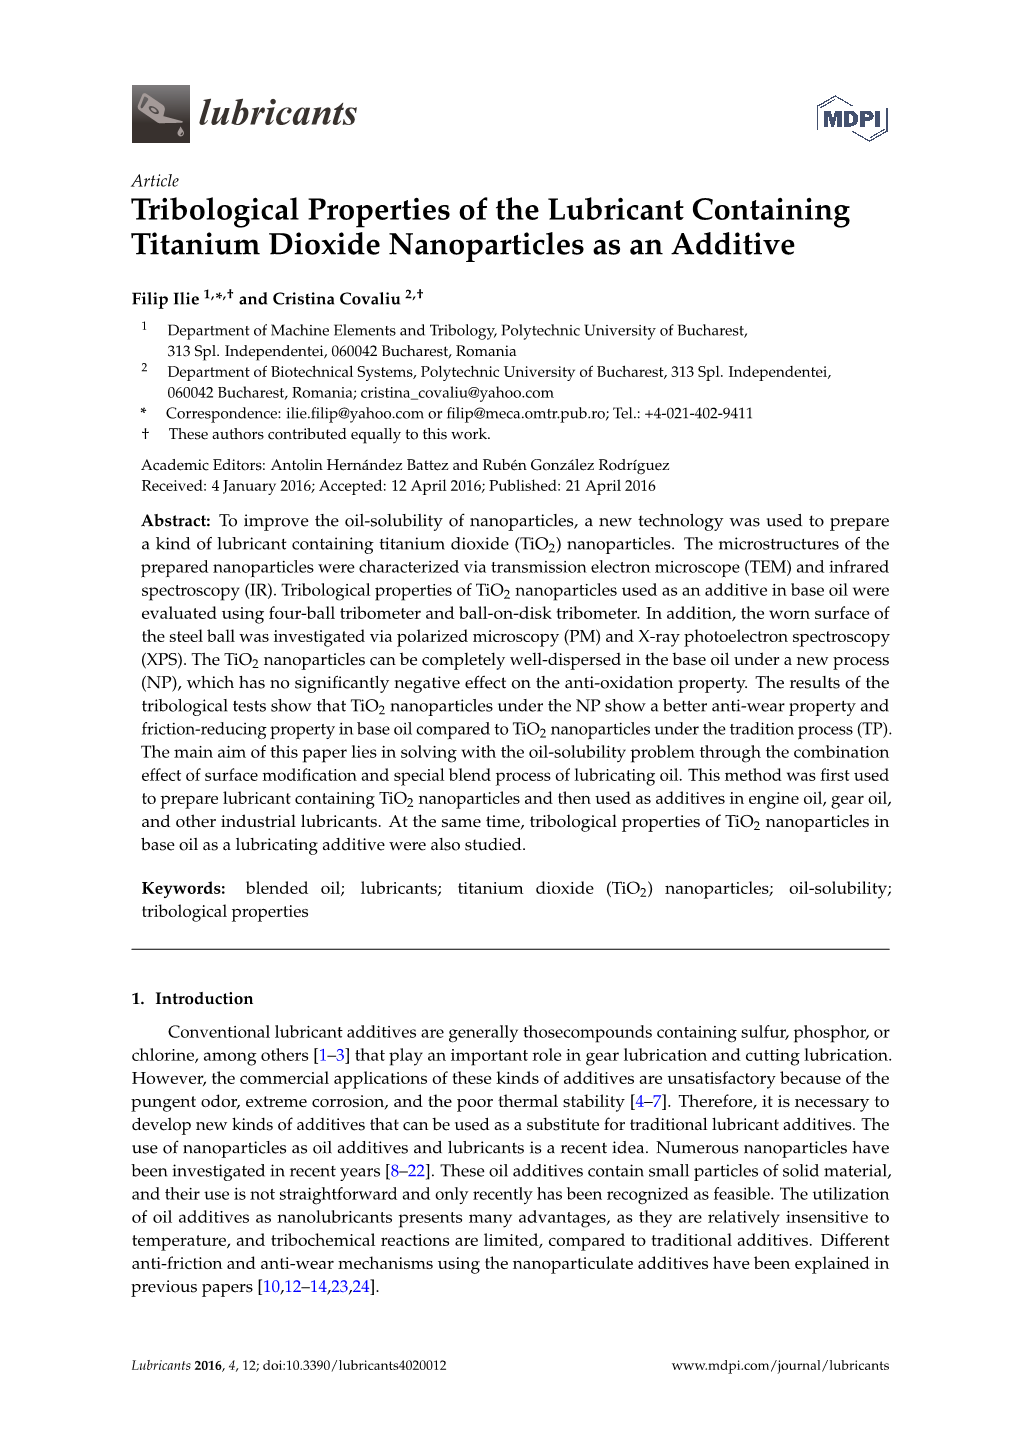 Tribological Properties of the Lubricant Containing Titanium Dioxide Nanoparticles As an Additive